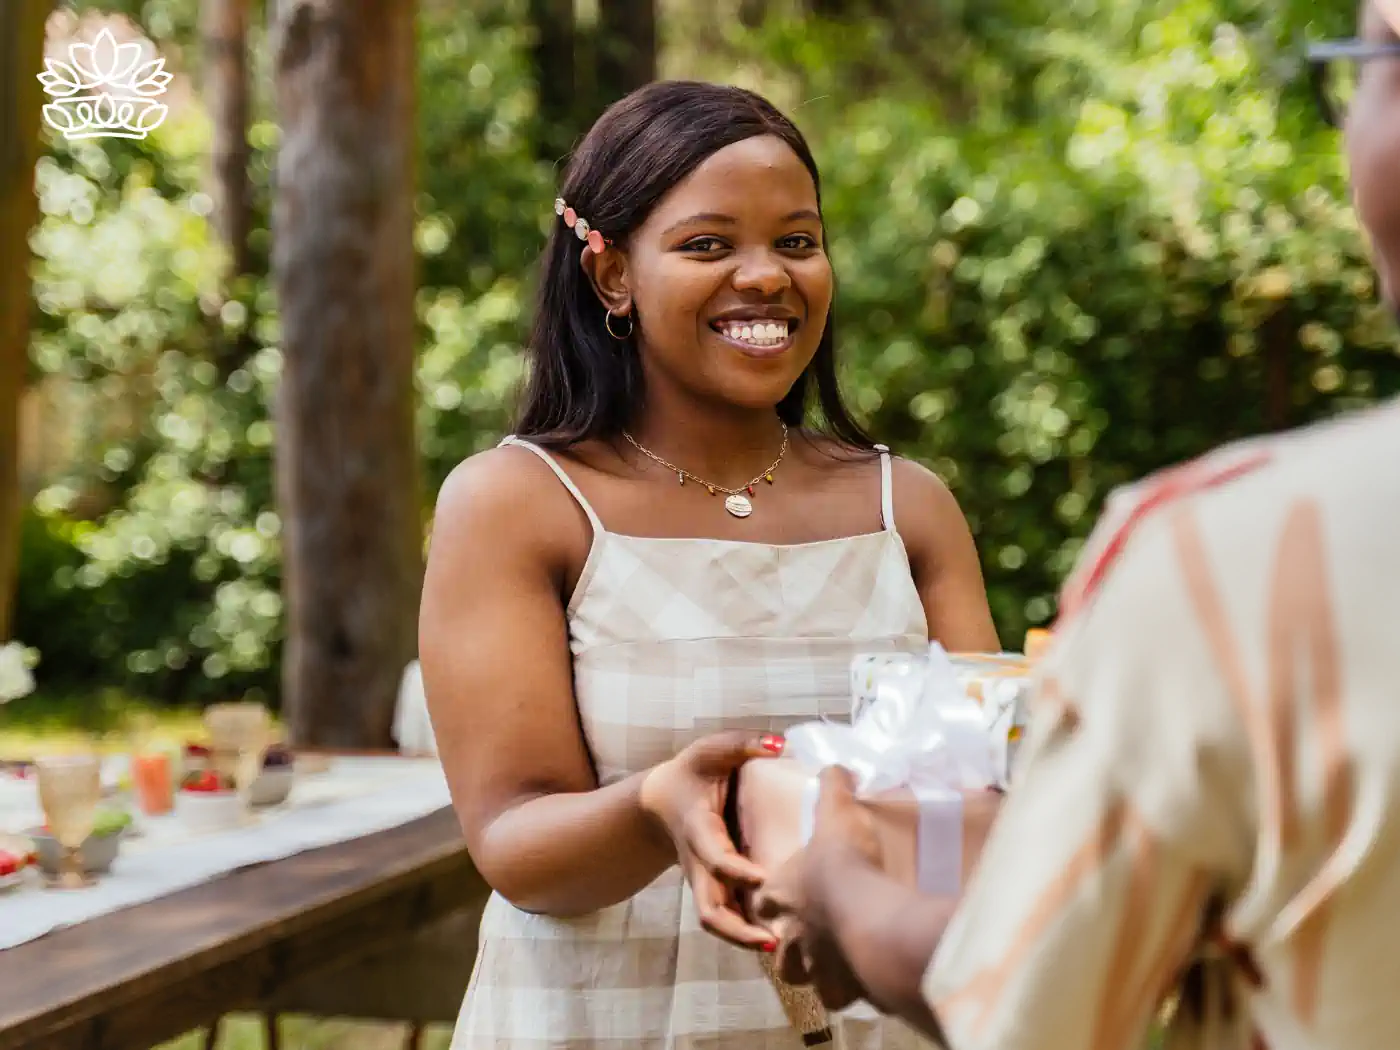 A young woman receives a gift during an outdoor gathering. Gemini Flowers & Gifts Collection. Fabulous Flowers and Gifts.